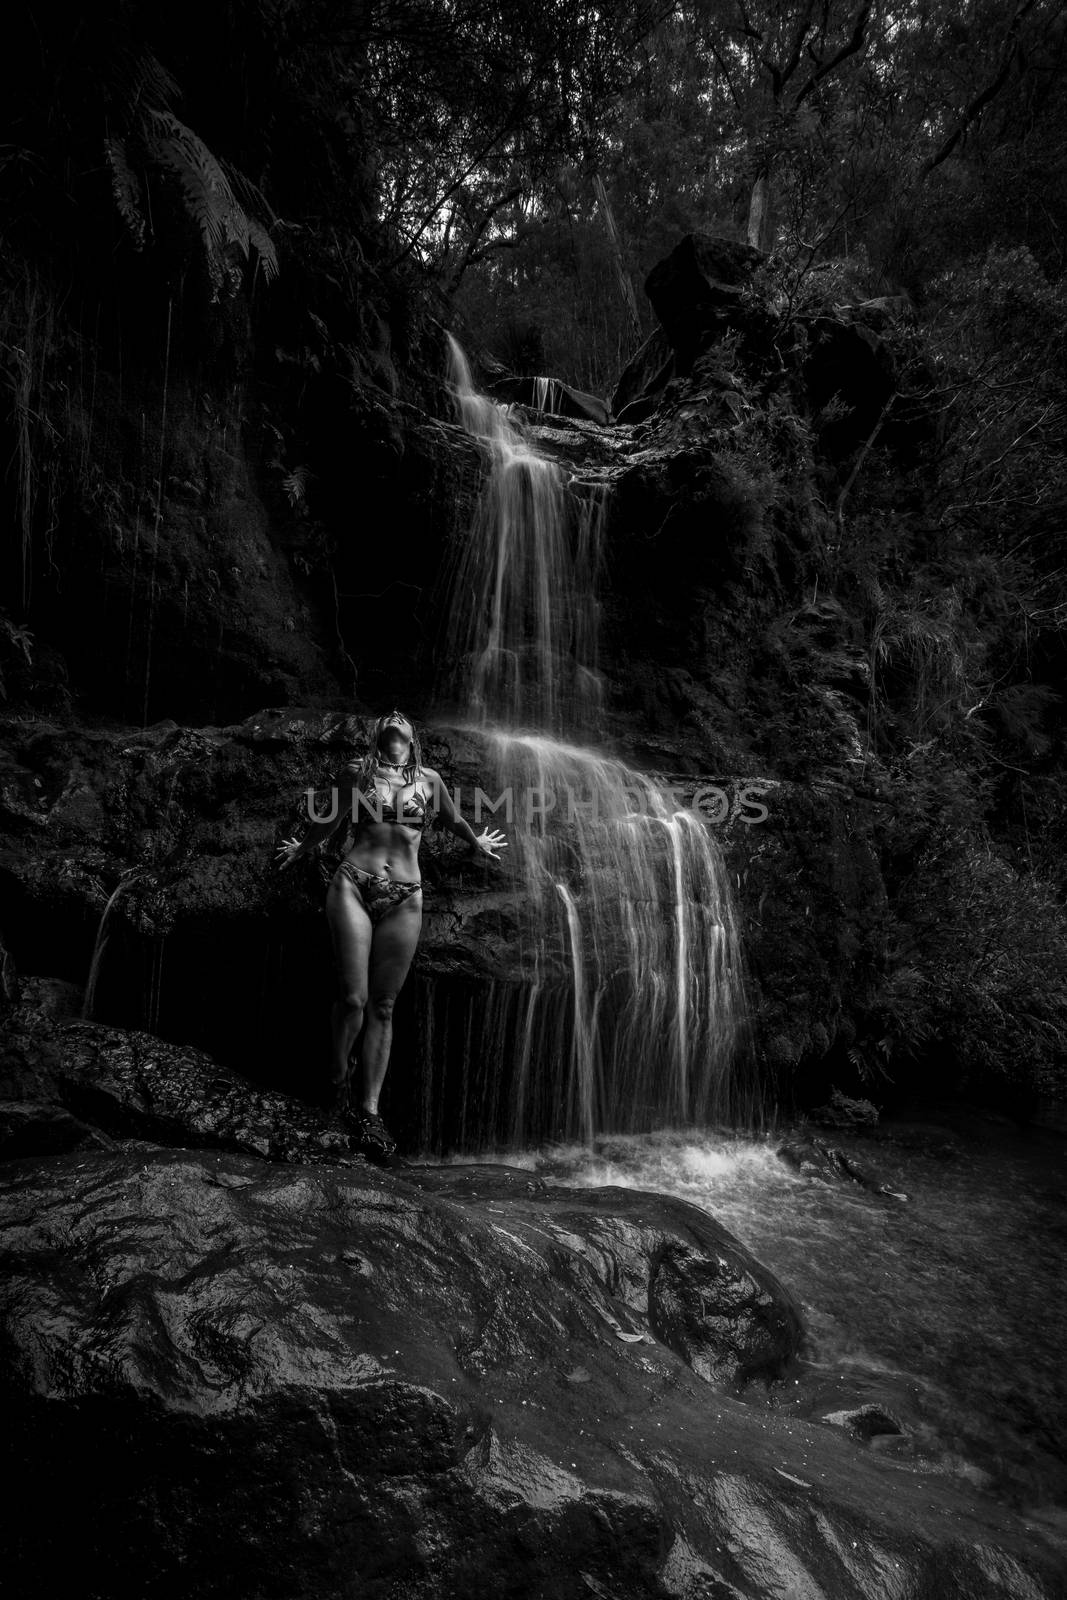 A shimmering waterfall rushed over her.  Standing on slippery rocks wet from the cascades the woman let the falling water invigorate herskin before taking a swim in a secluded waterhole in bushland Australia